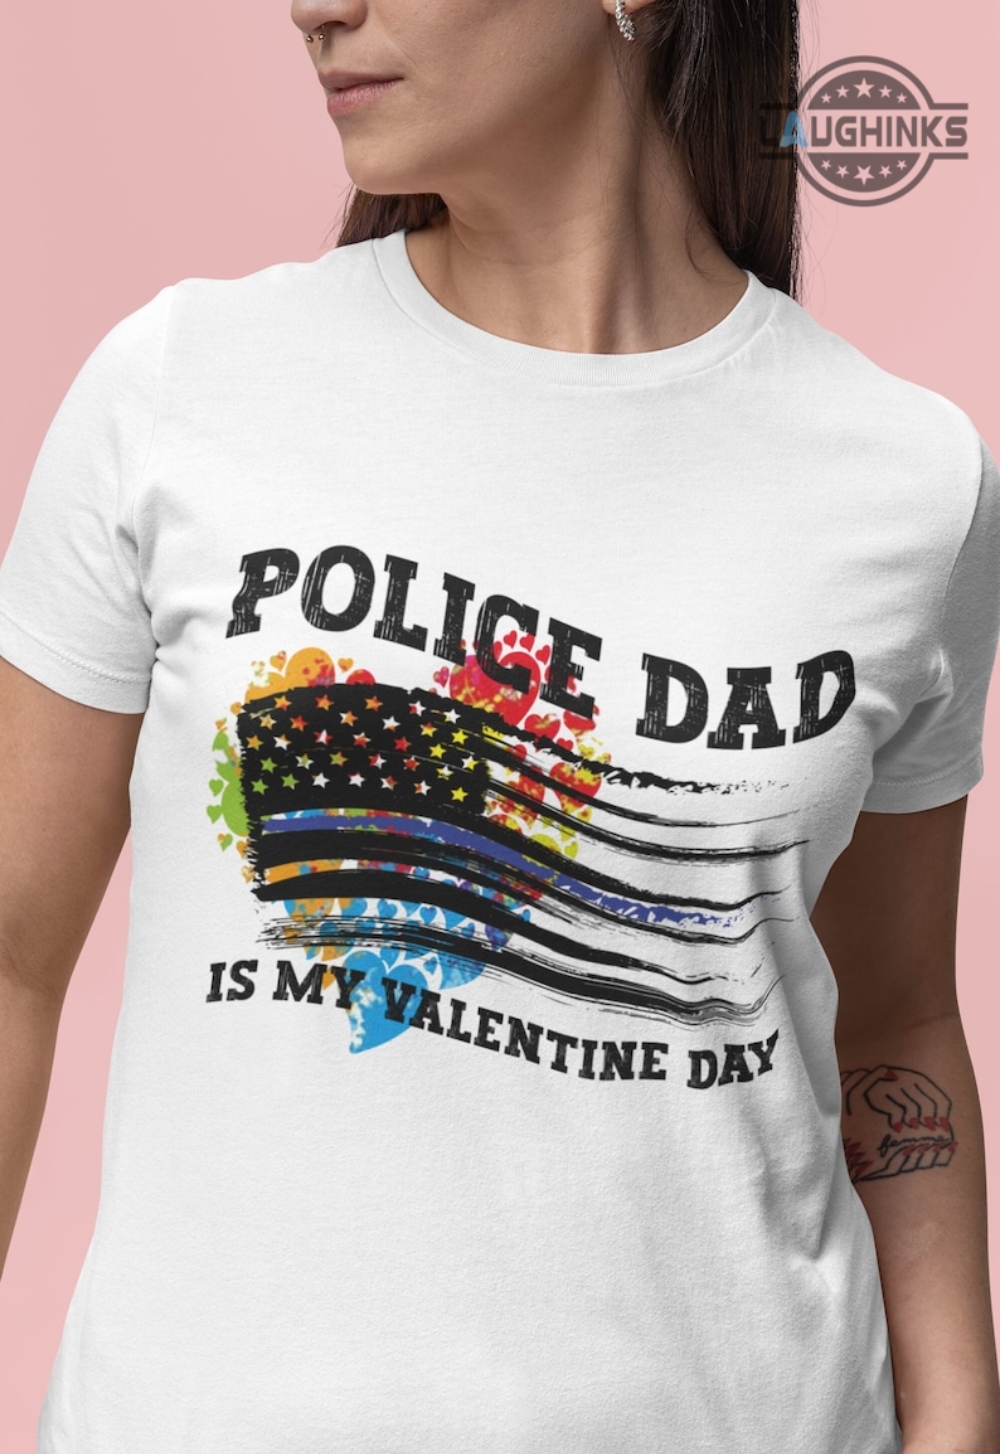 Police T Shirt Sweatshirt Hoodie Police Dad Is My Valentine Day Tshirt Funny Police Officer Love Tee Us Flag Hearts Shirts Cop Valentines Day Gift Police Support